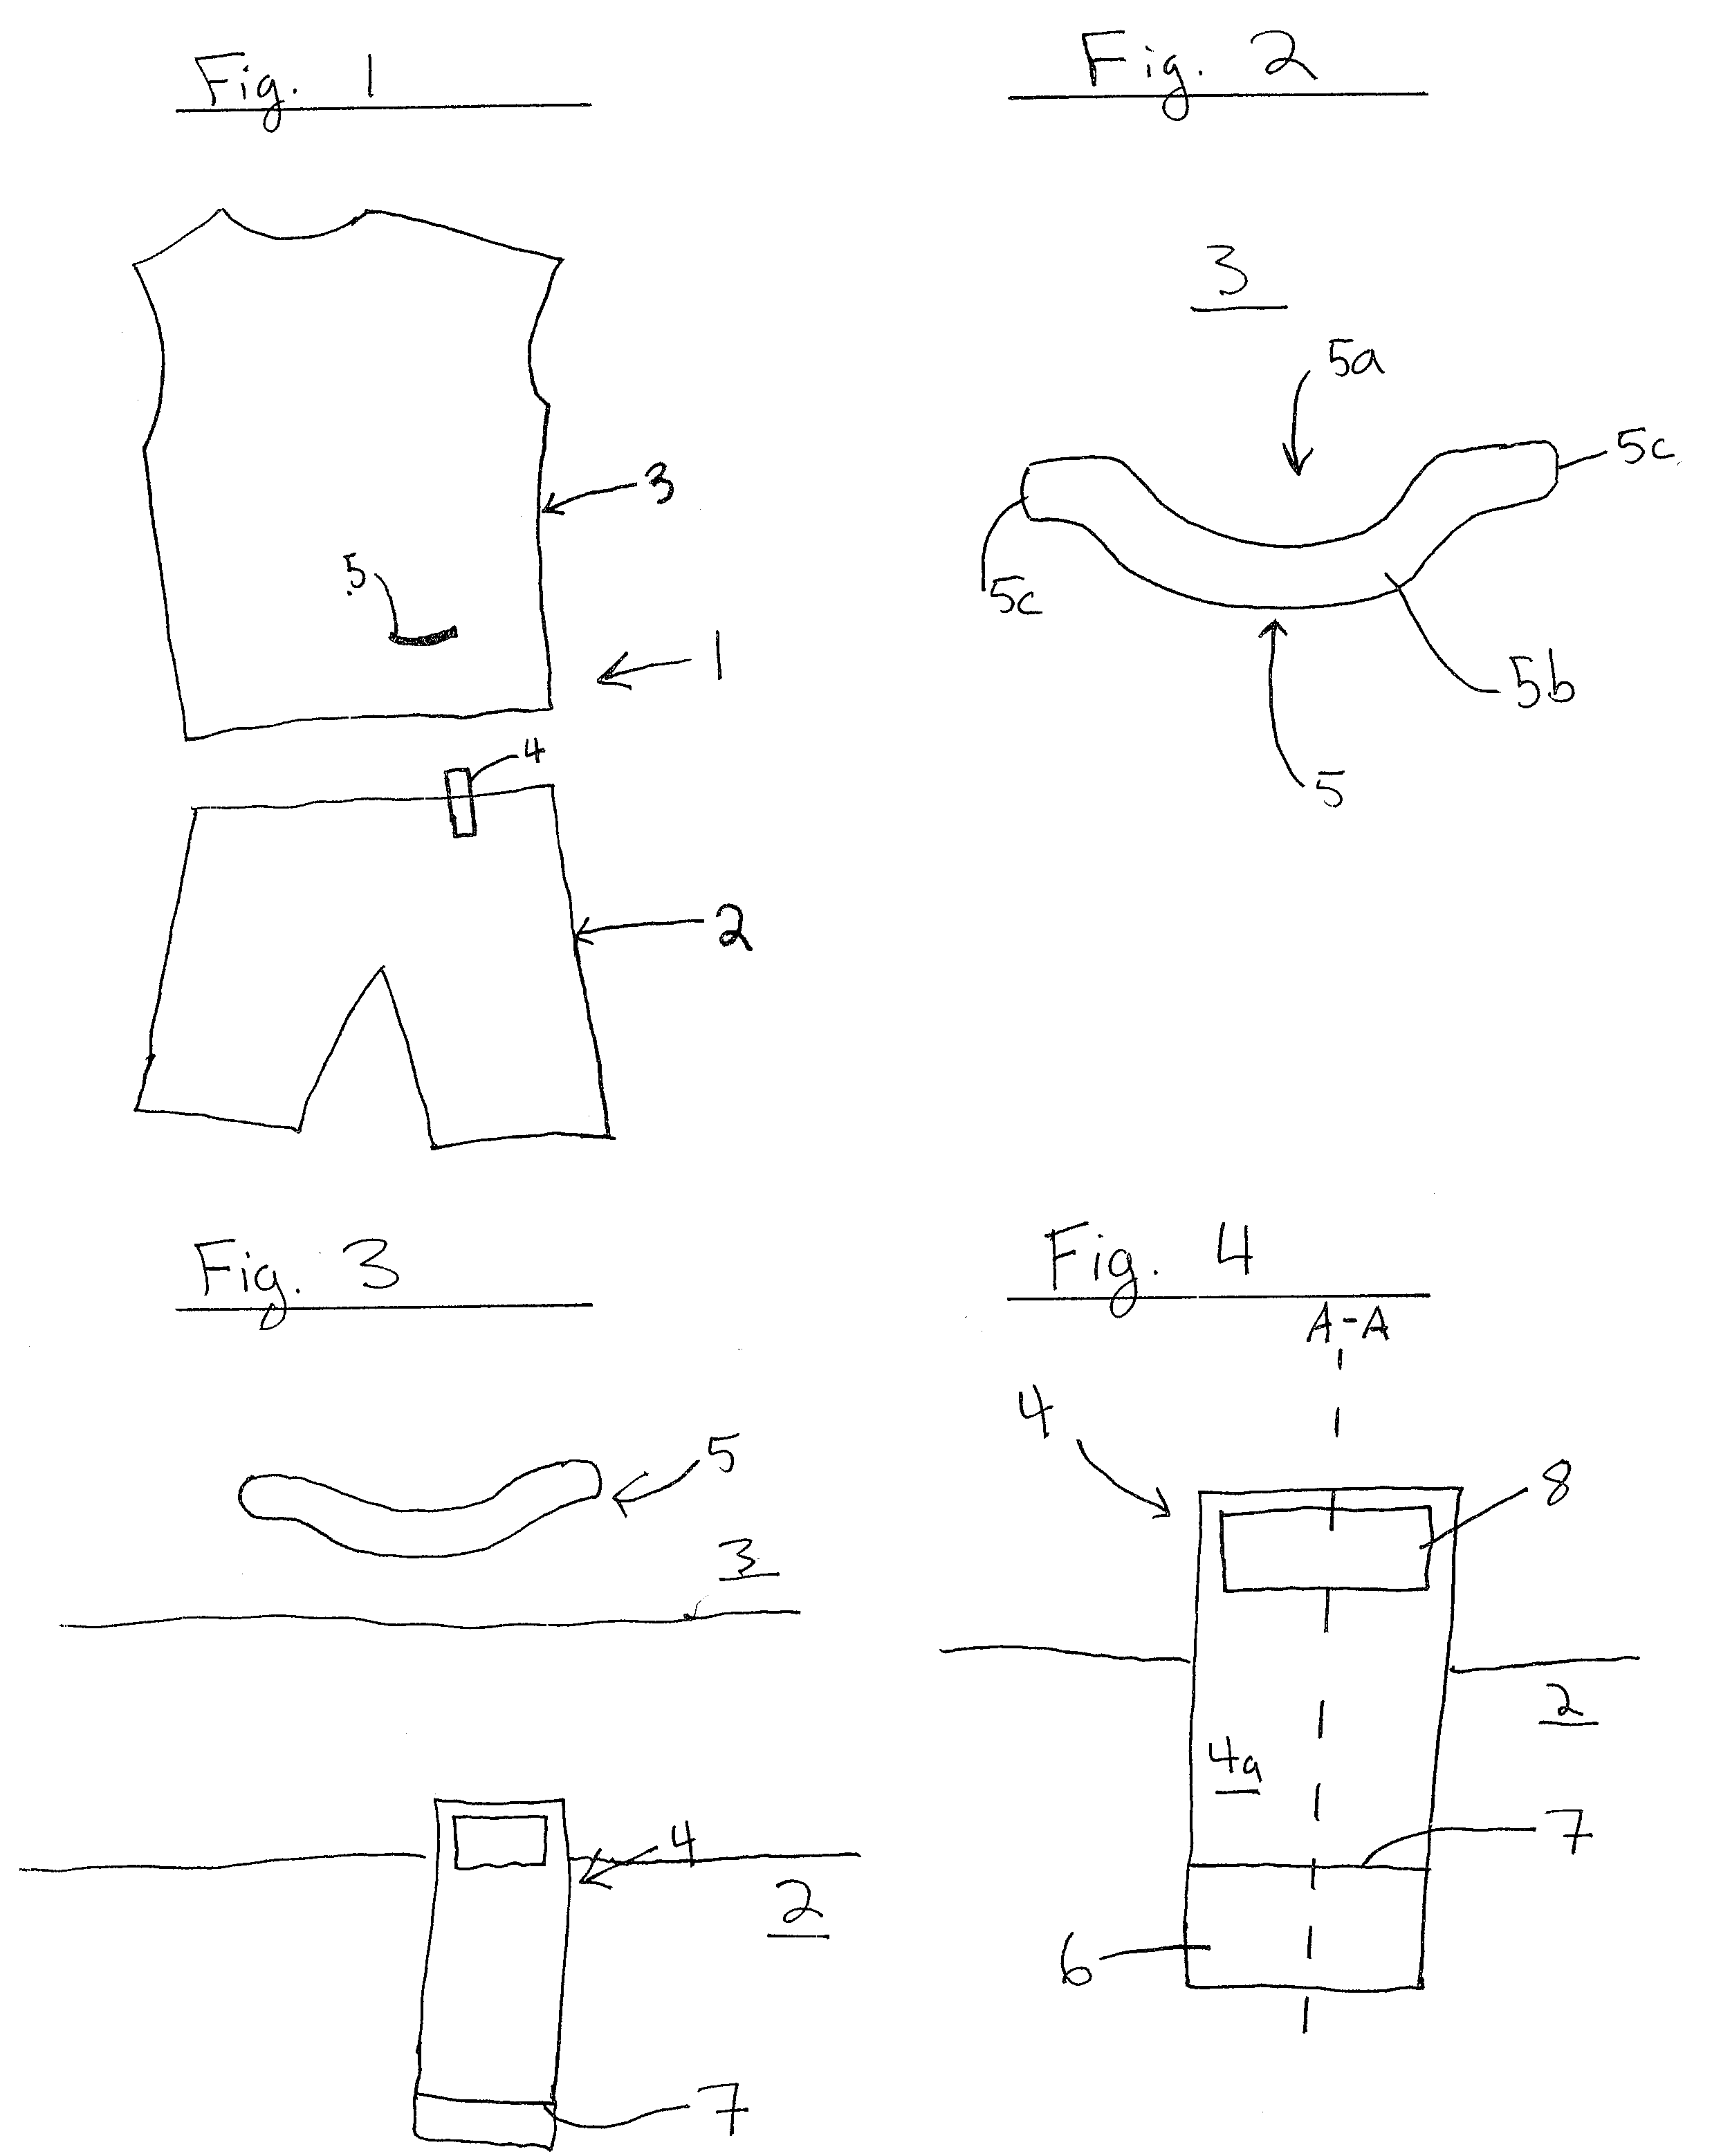 Closure System For Reversibly Connecting Items Of Athletic Wear